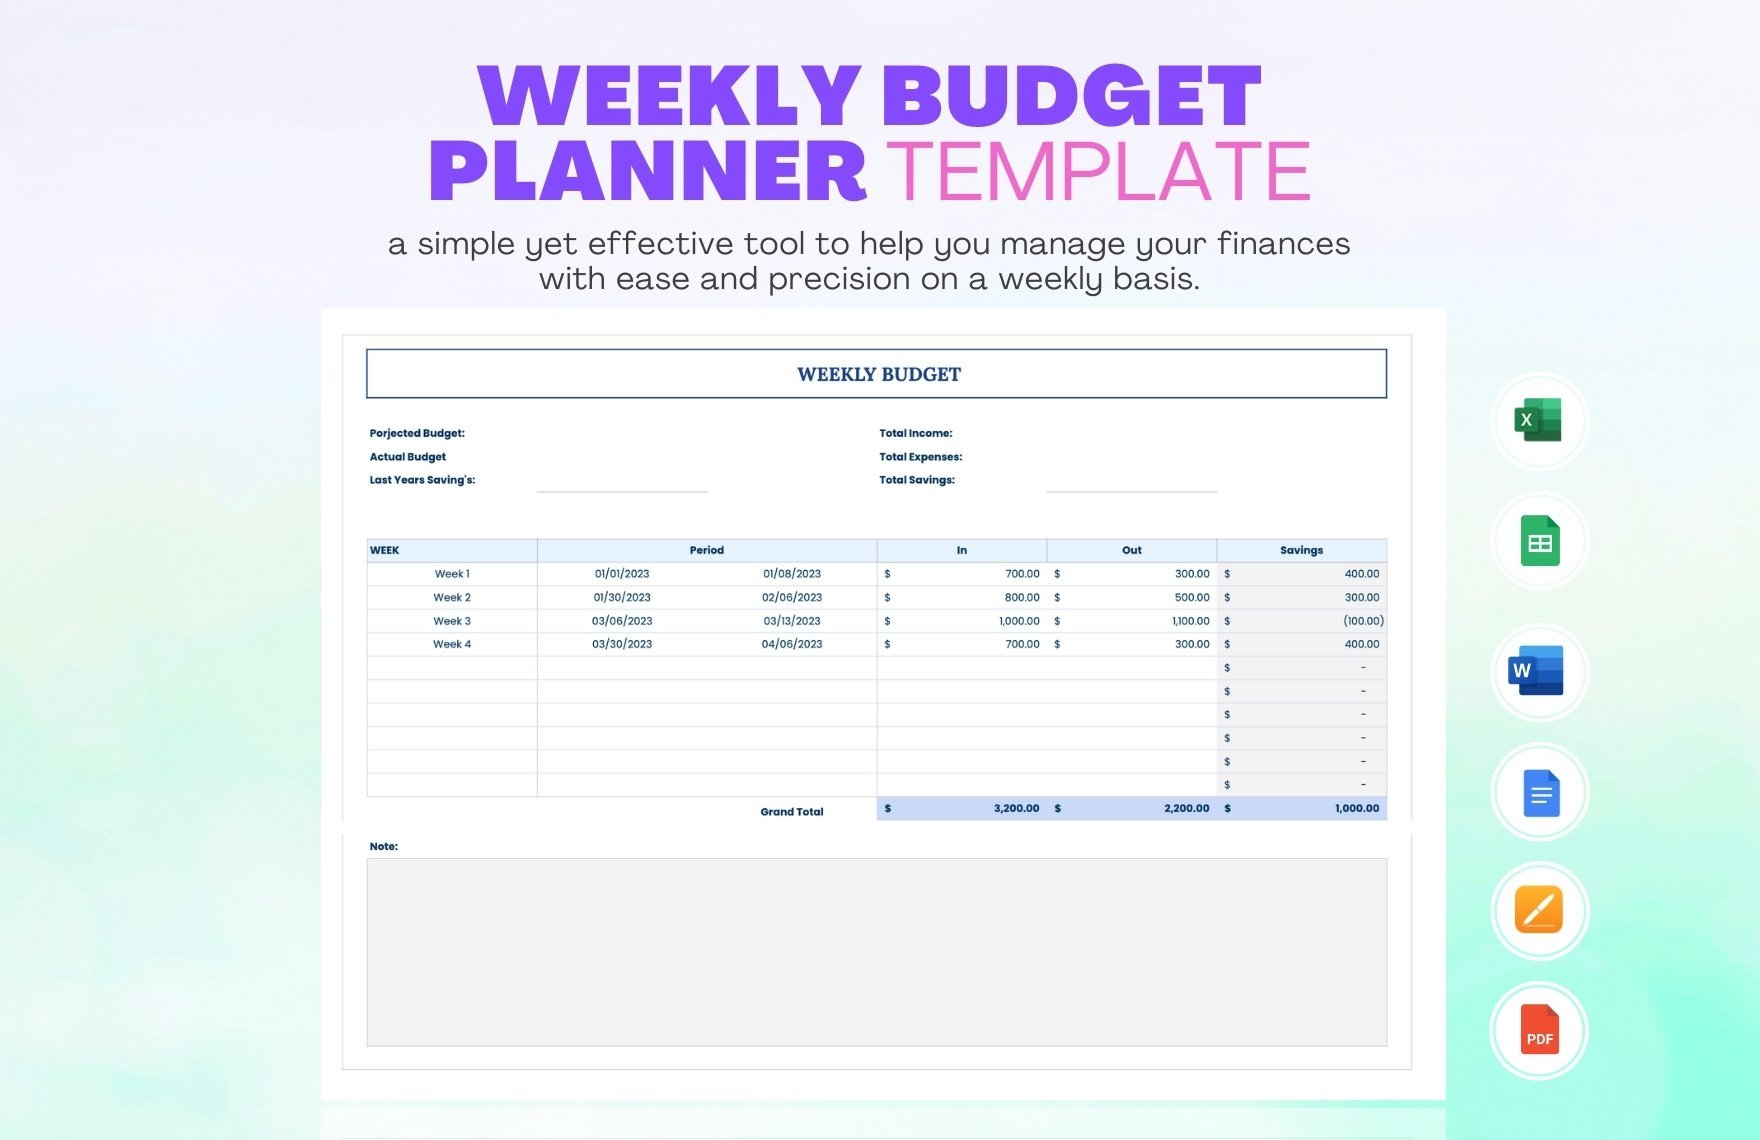 Weekly Budget Planner Template in Word, Google Docs, Excel, PDF, Google Sheets, Apple Pages